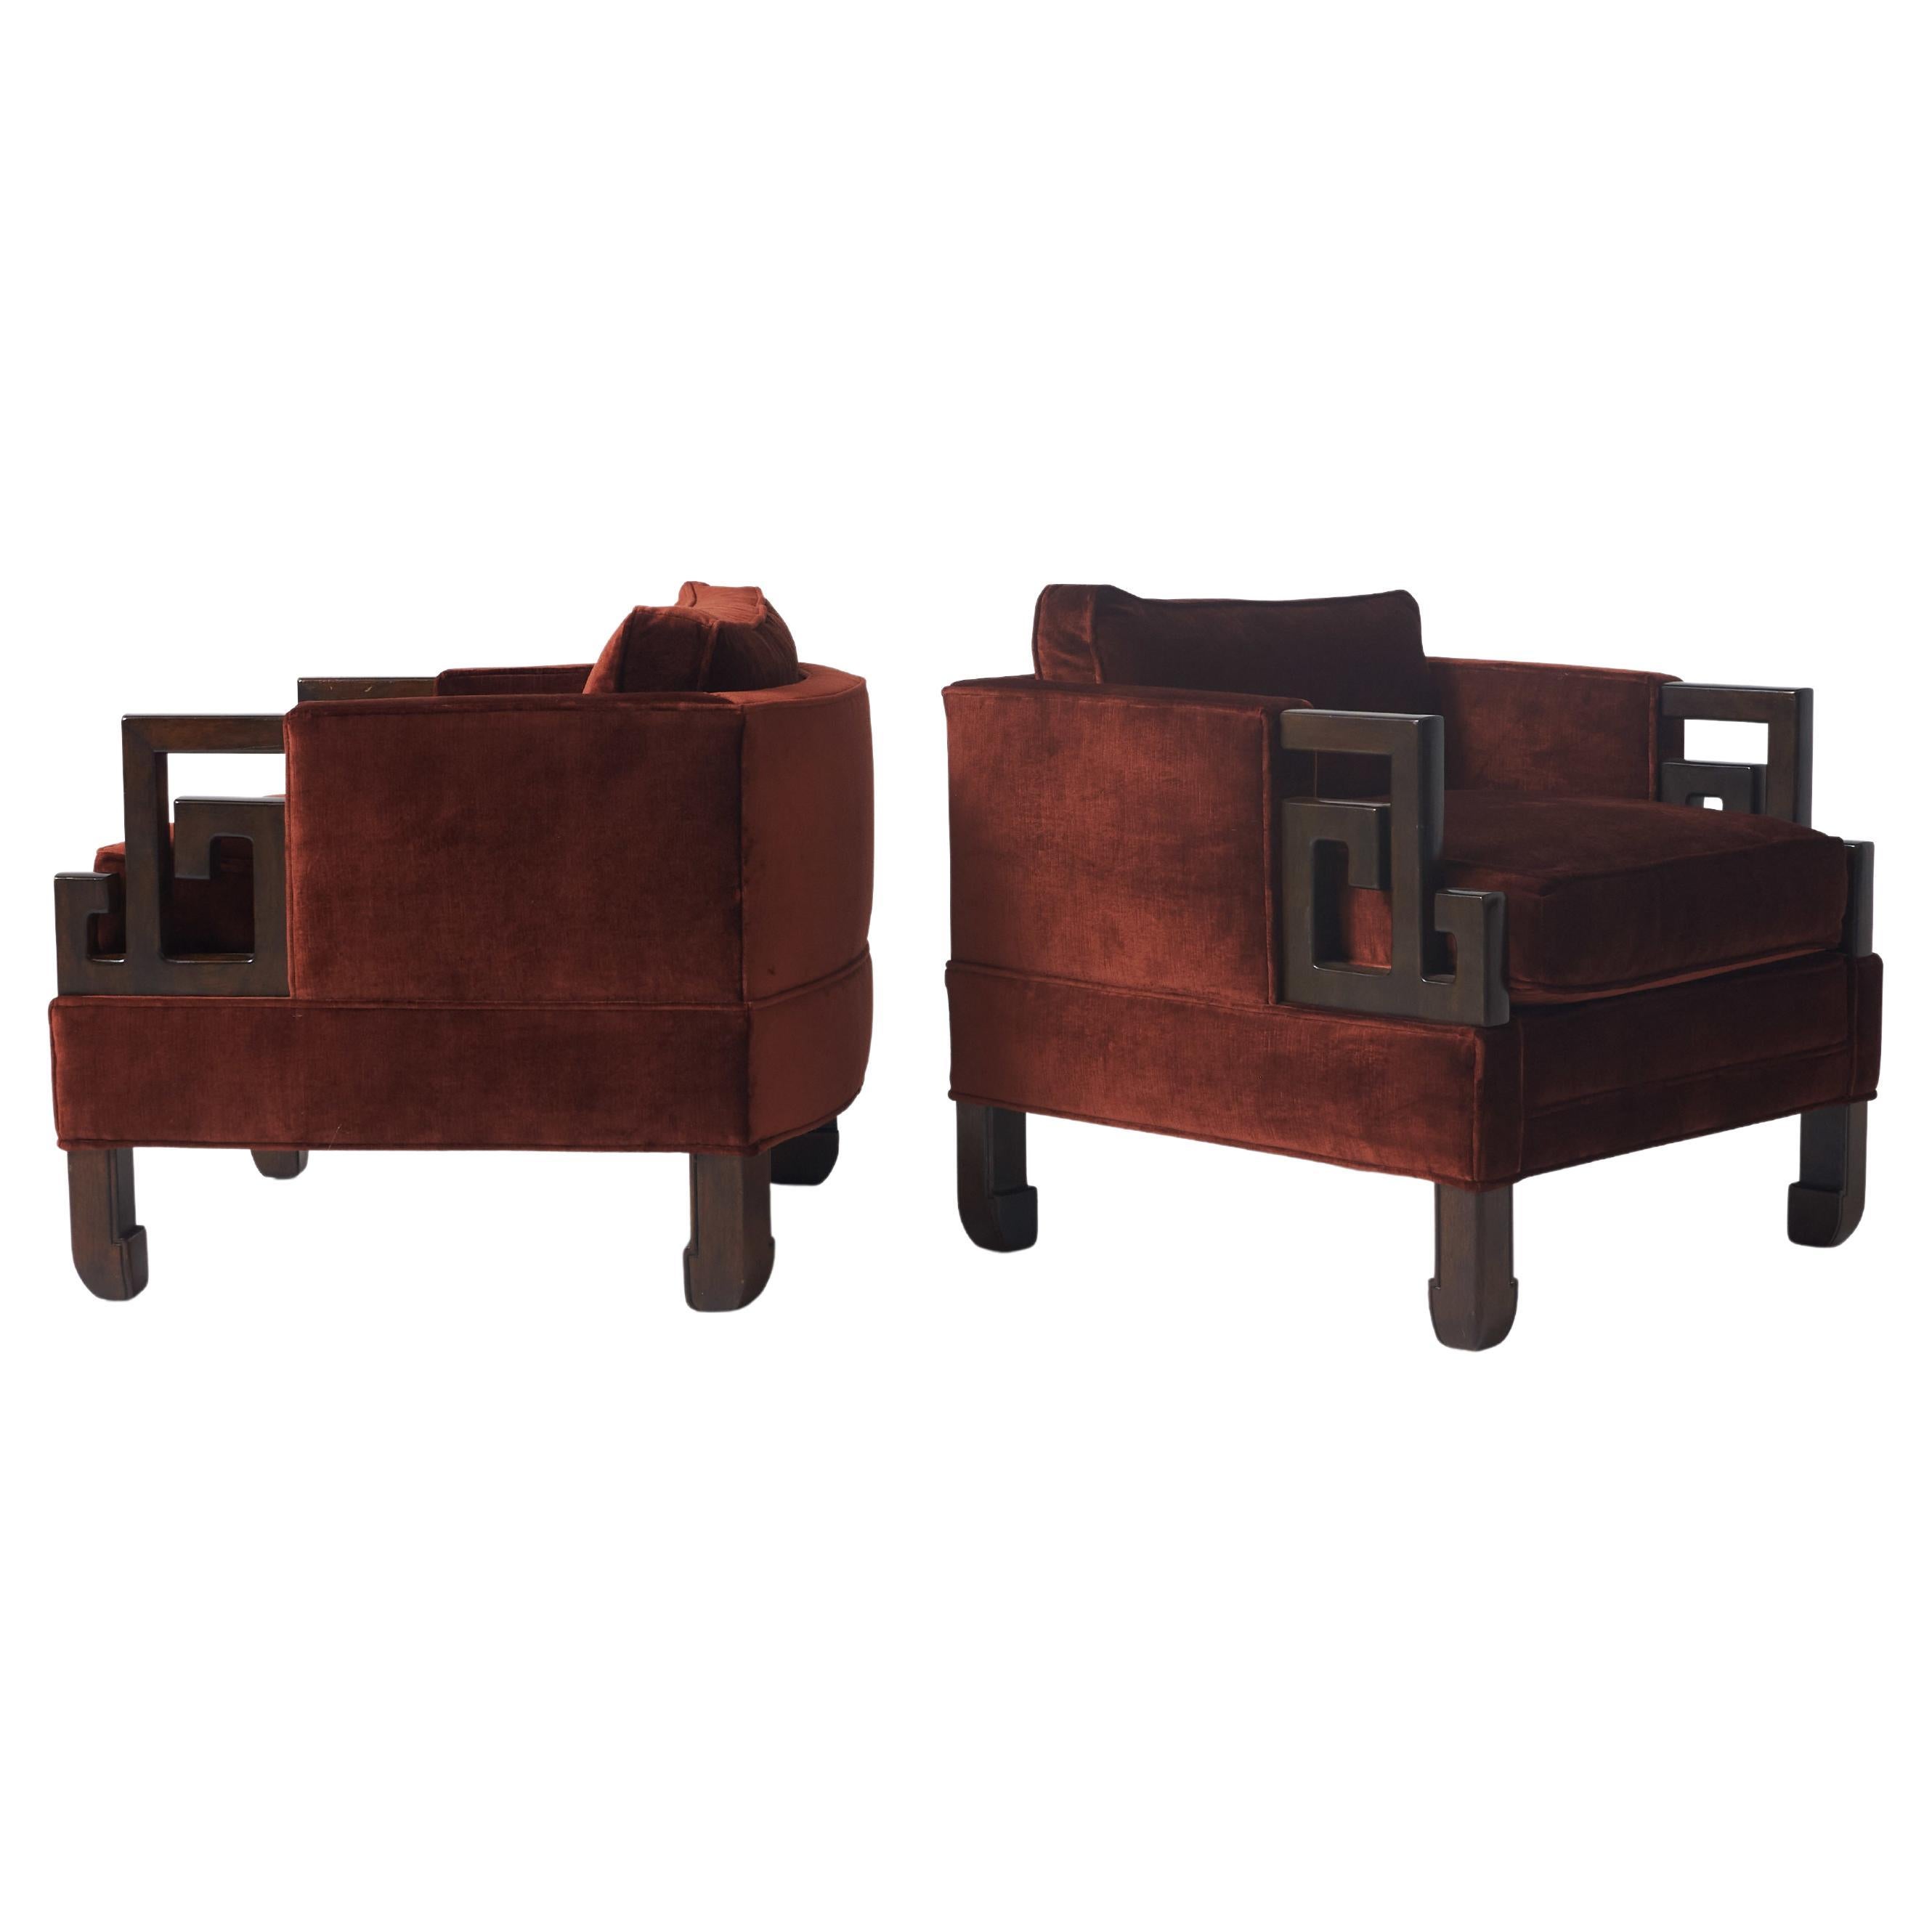 Pair of Asian Modern Lounge Chairs Attributed to James Mont For Sale